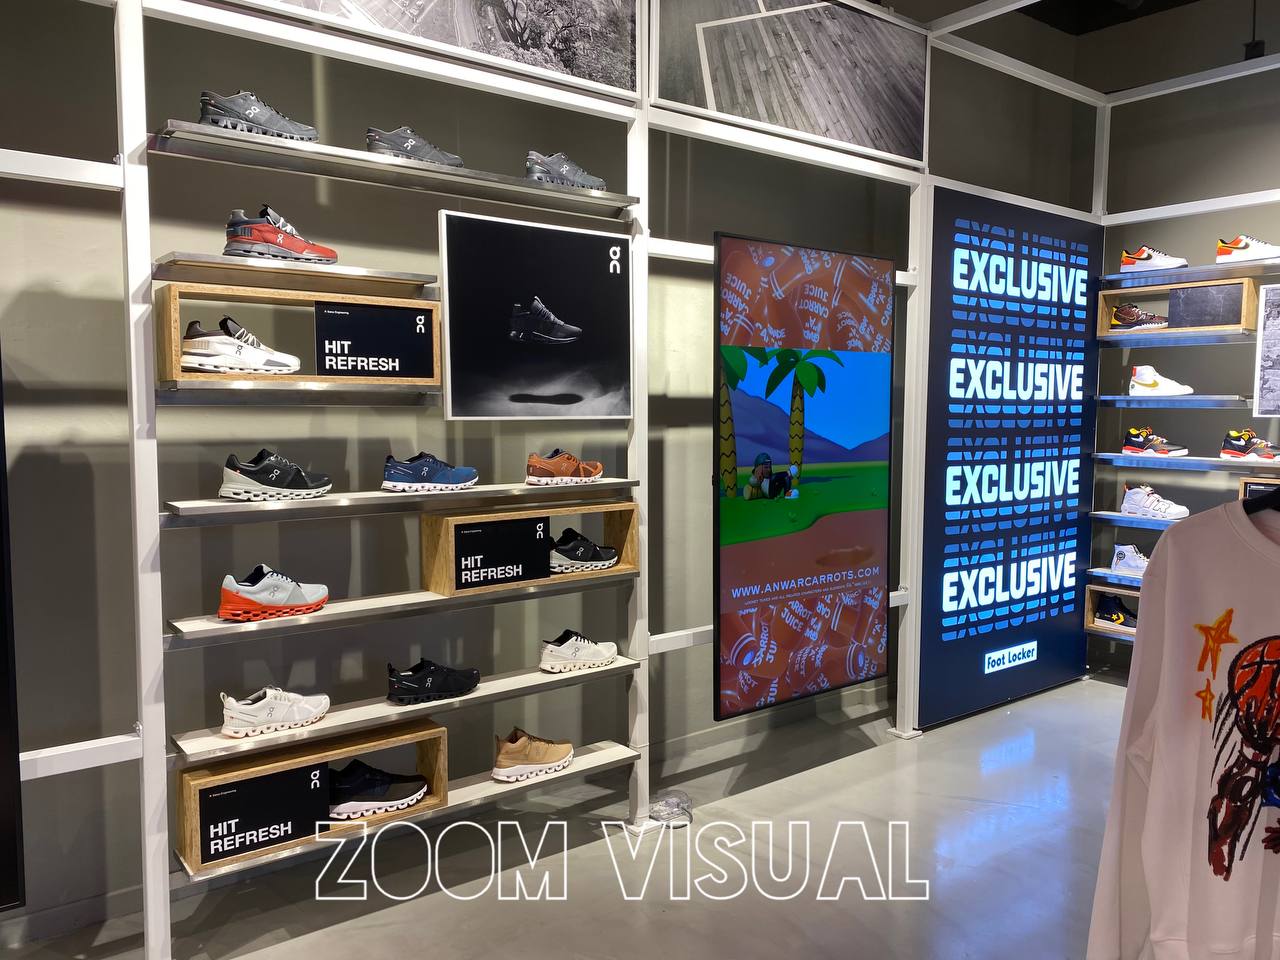 Singapore’s premier LED advertising display board service provider - ZOOM VISUAL